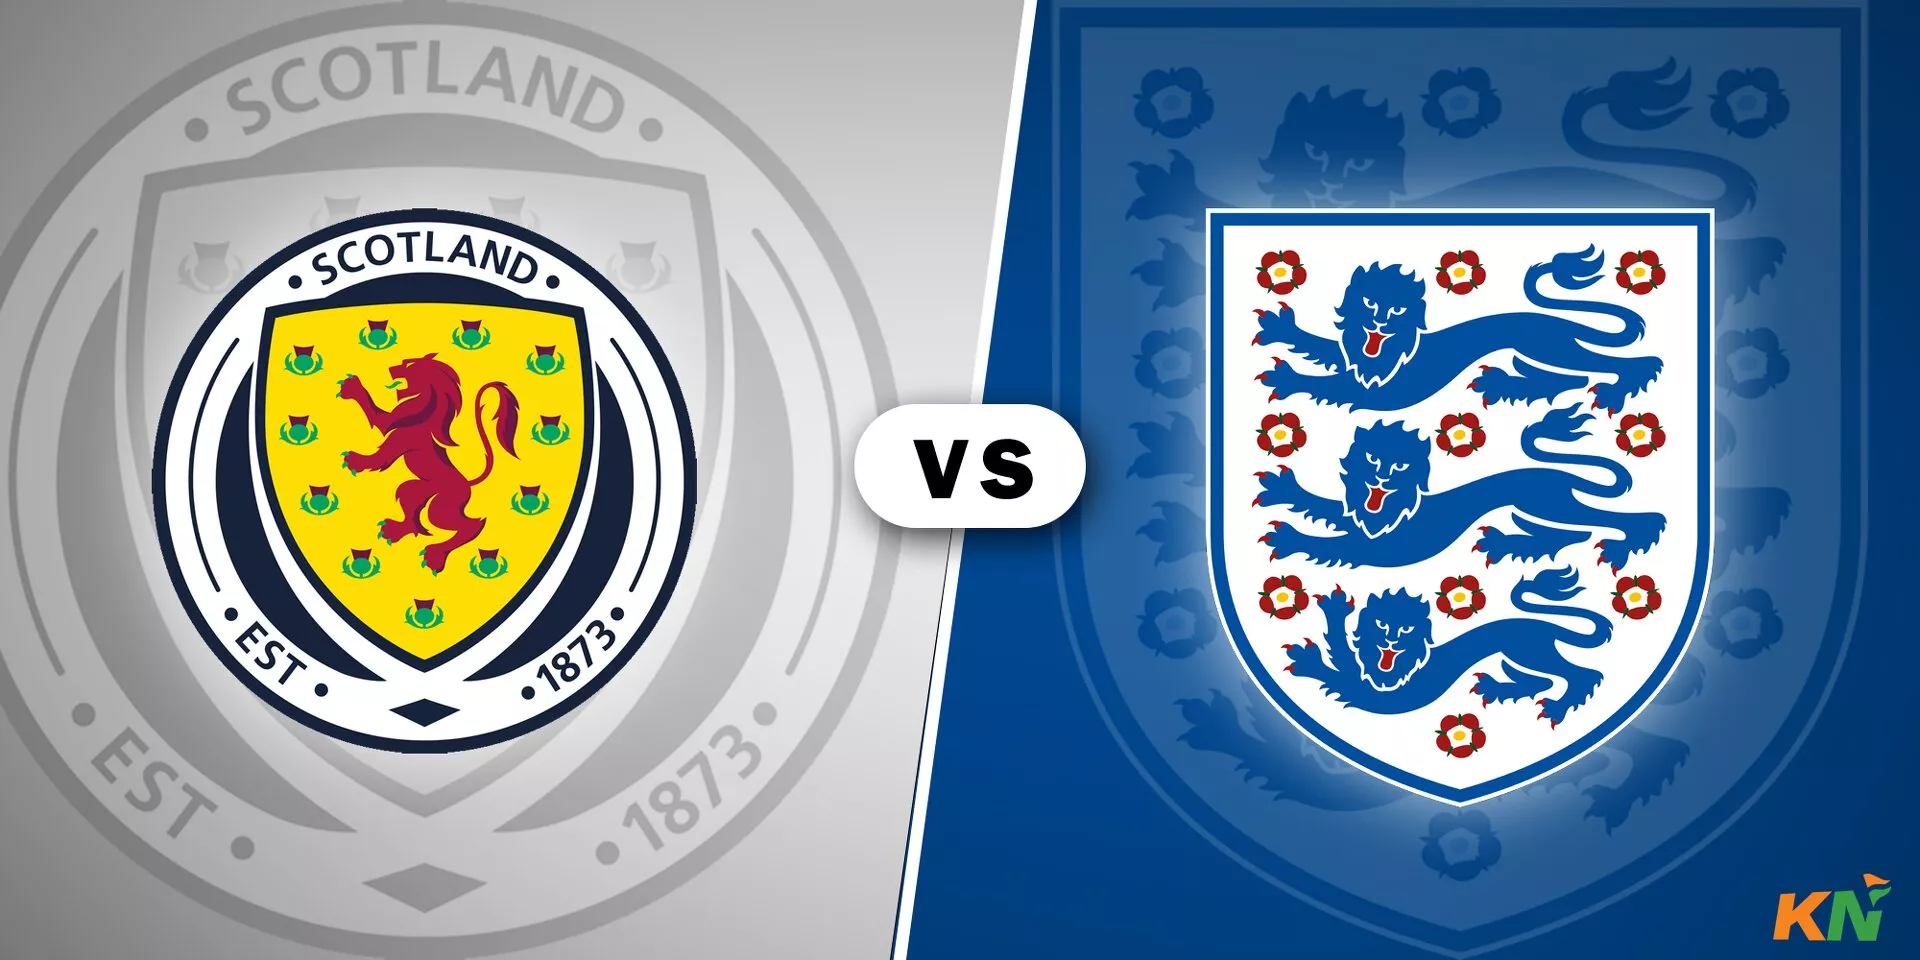 Scotland vs England: Where and how to watch?